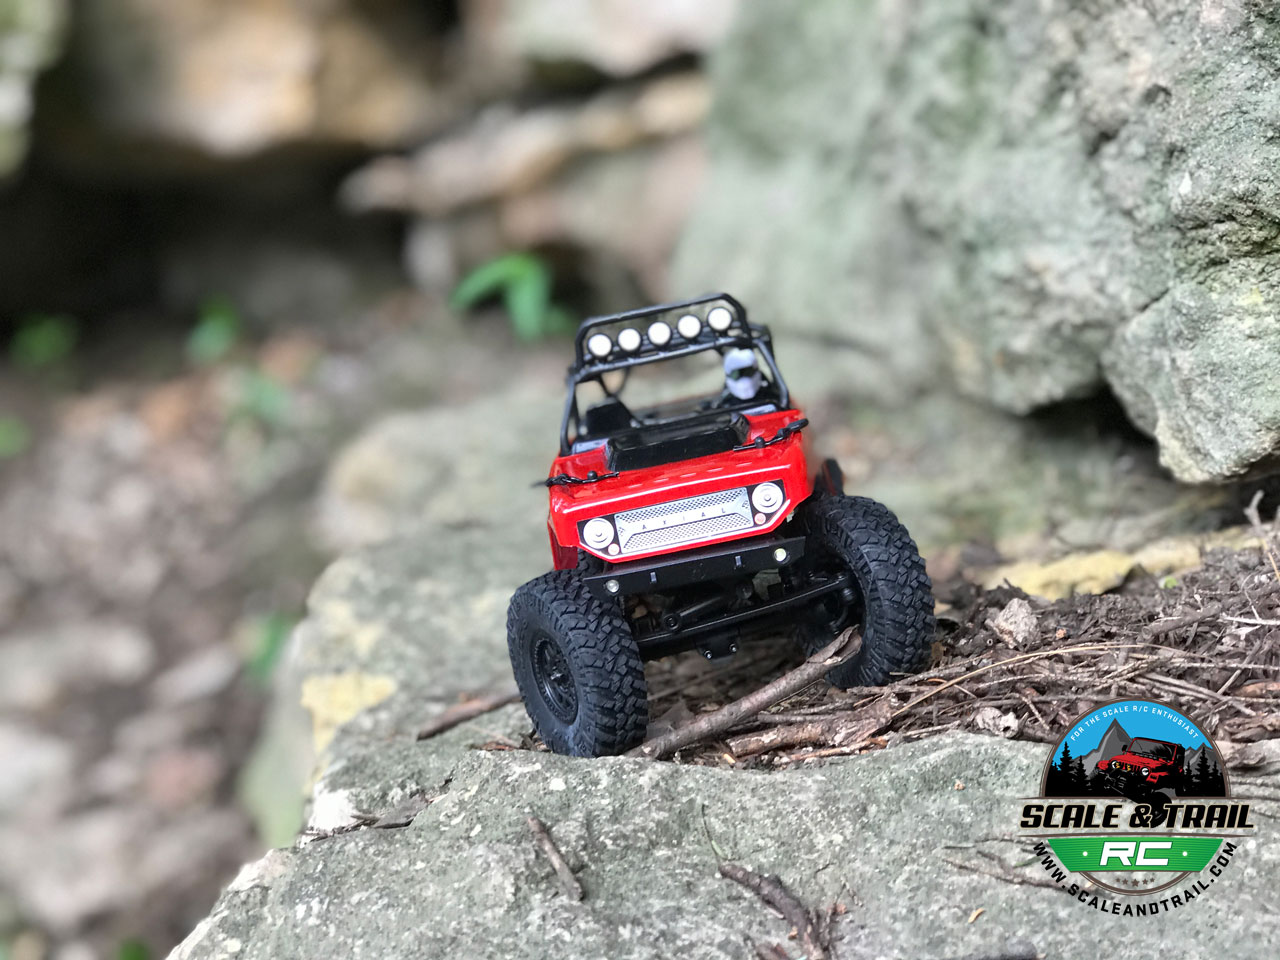 Axial Yeti Replacement Parts Rock Crawlers - HobbyTown